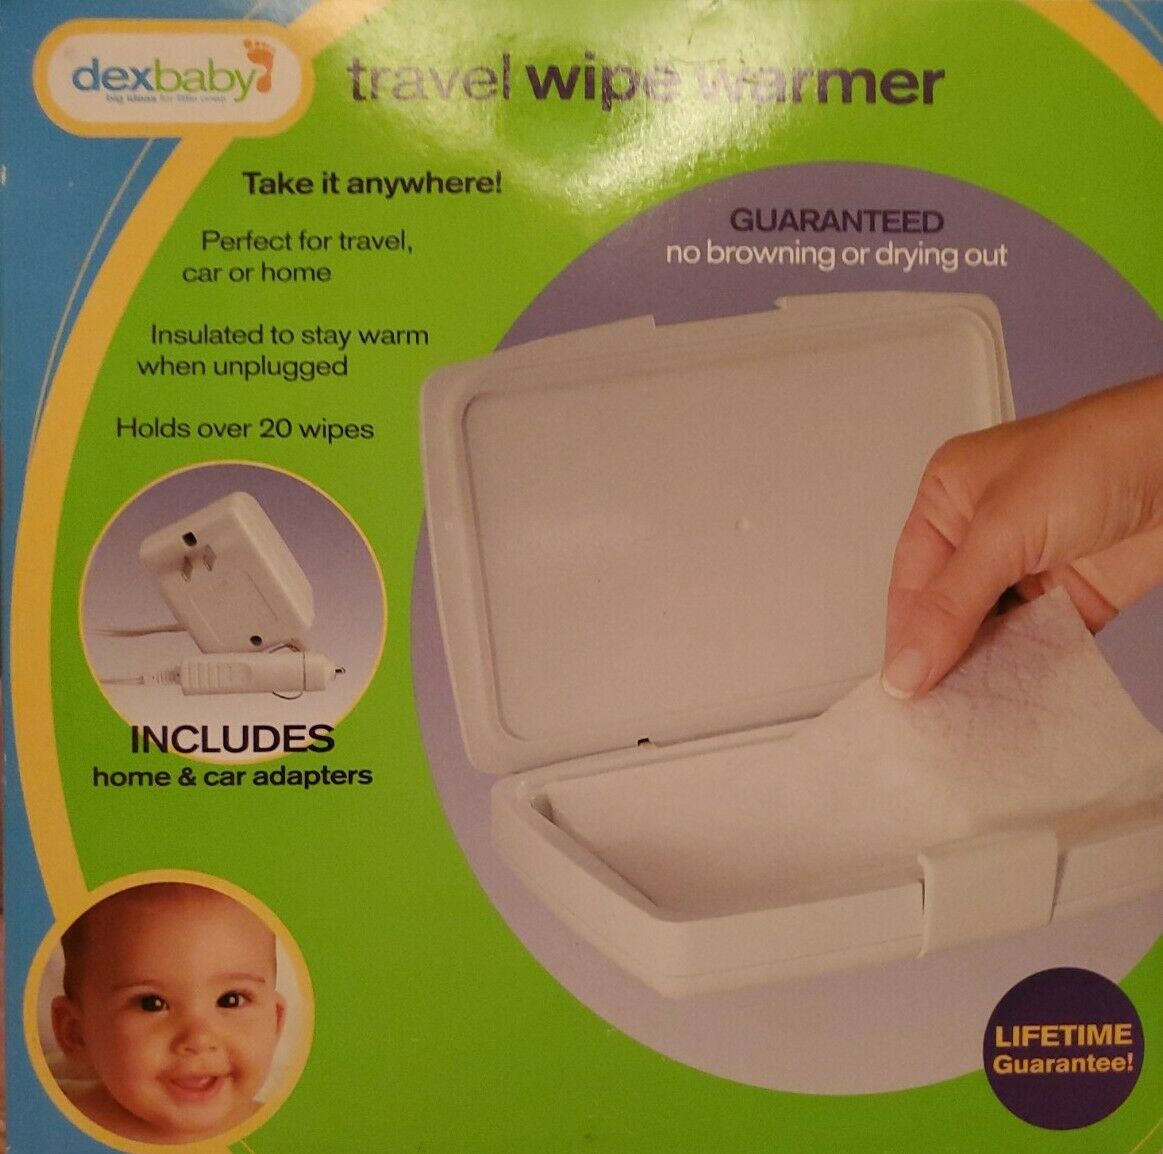 Dexbaby Travel Wipe Warmer Includes Home&car Adaptors Take It Anywhere. Wwtht-01